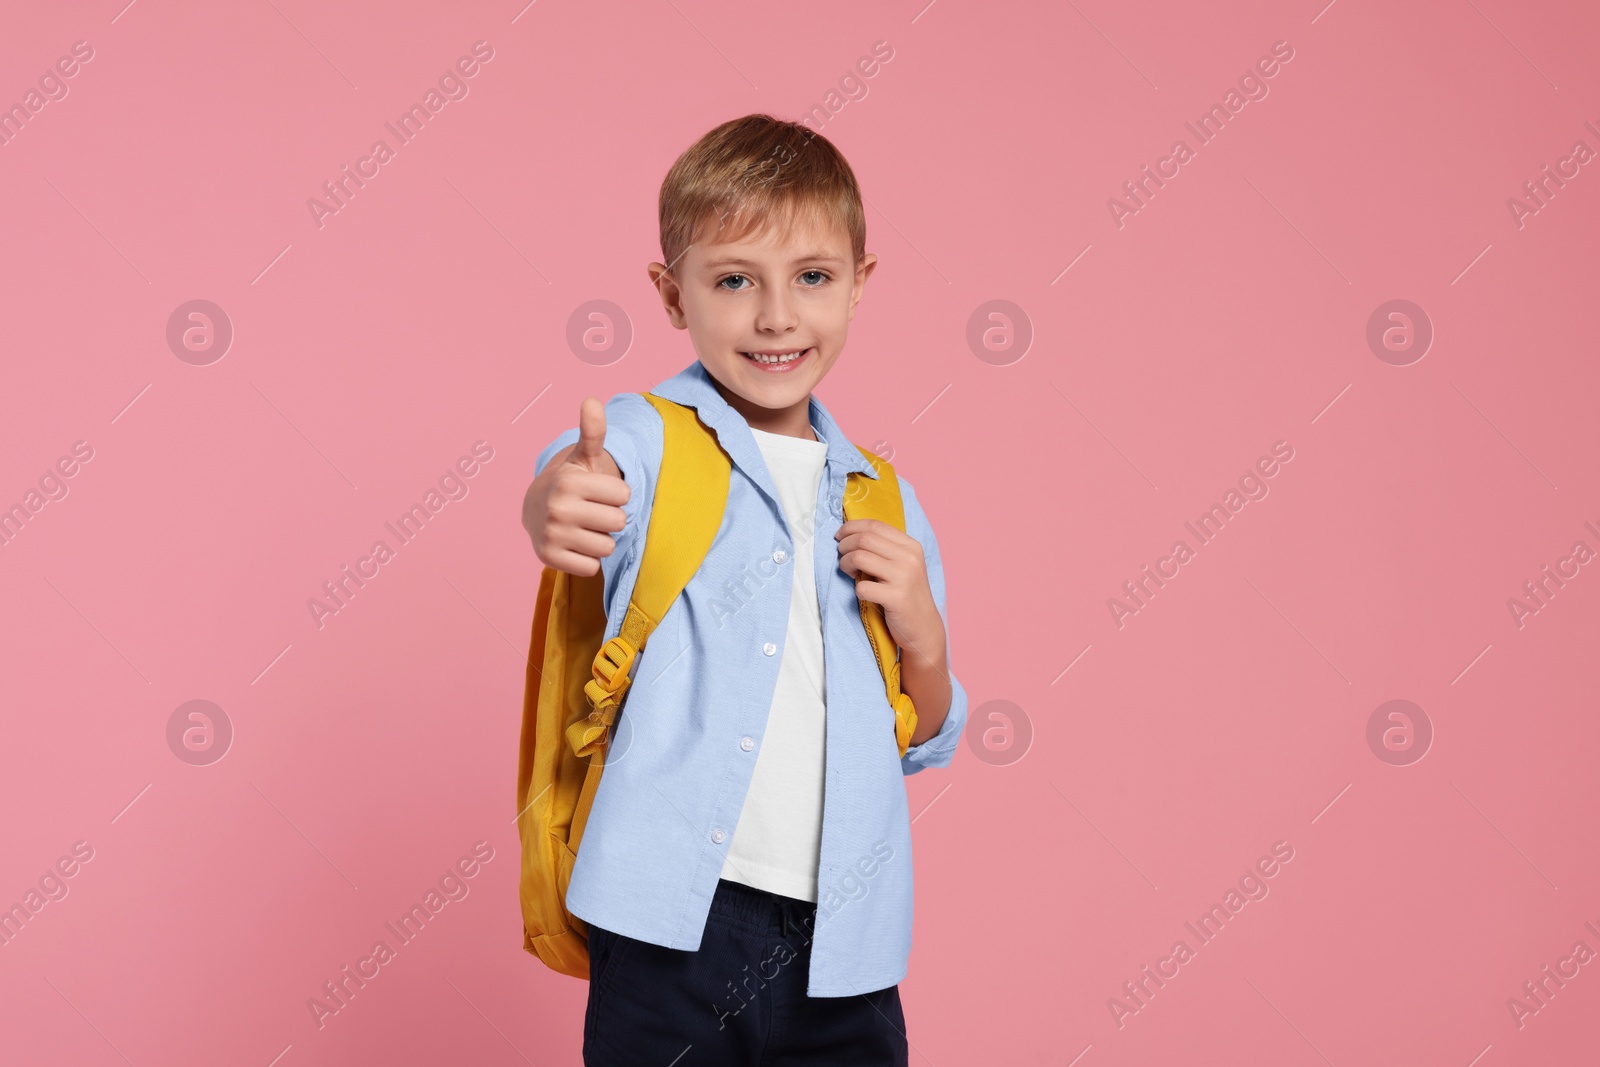 Photo of Happy schoolboy with backpack showing thumb up gesture on pink background